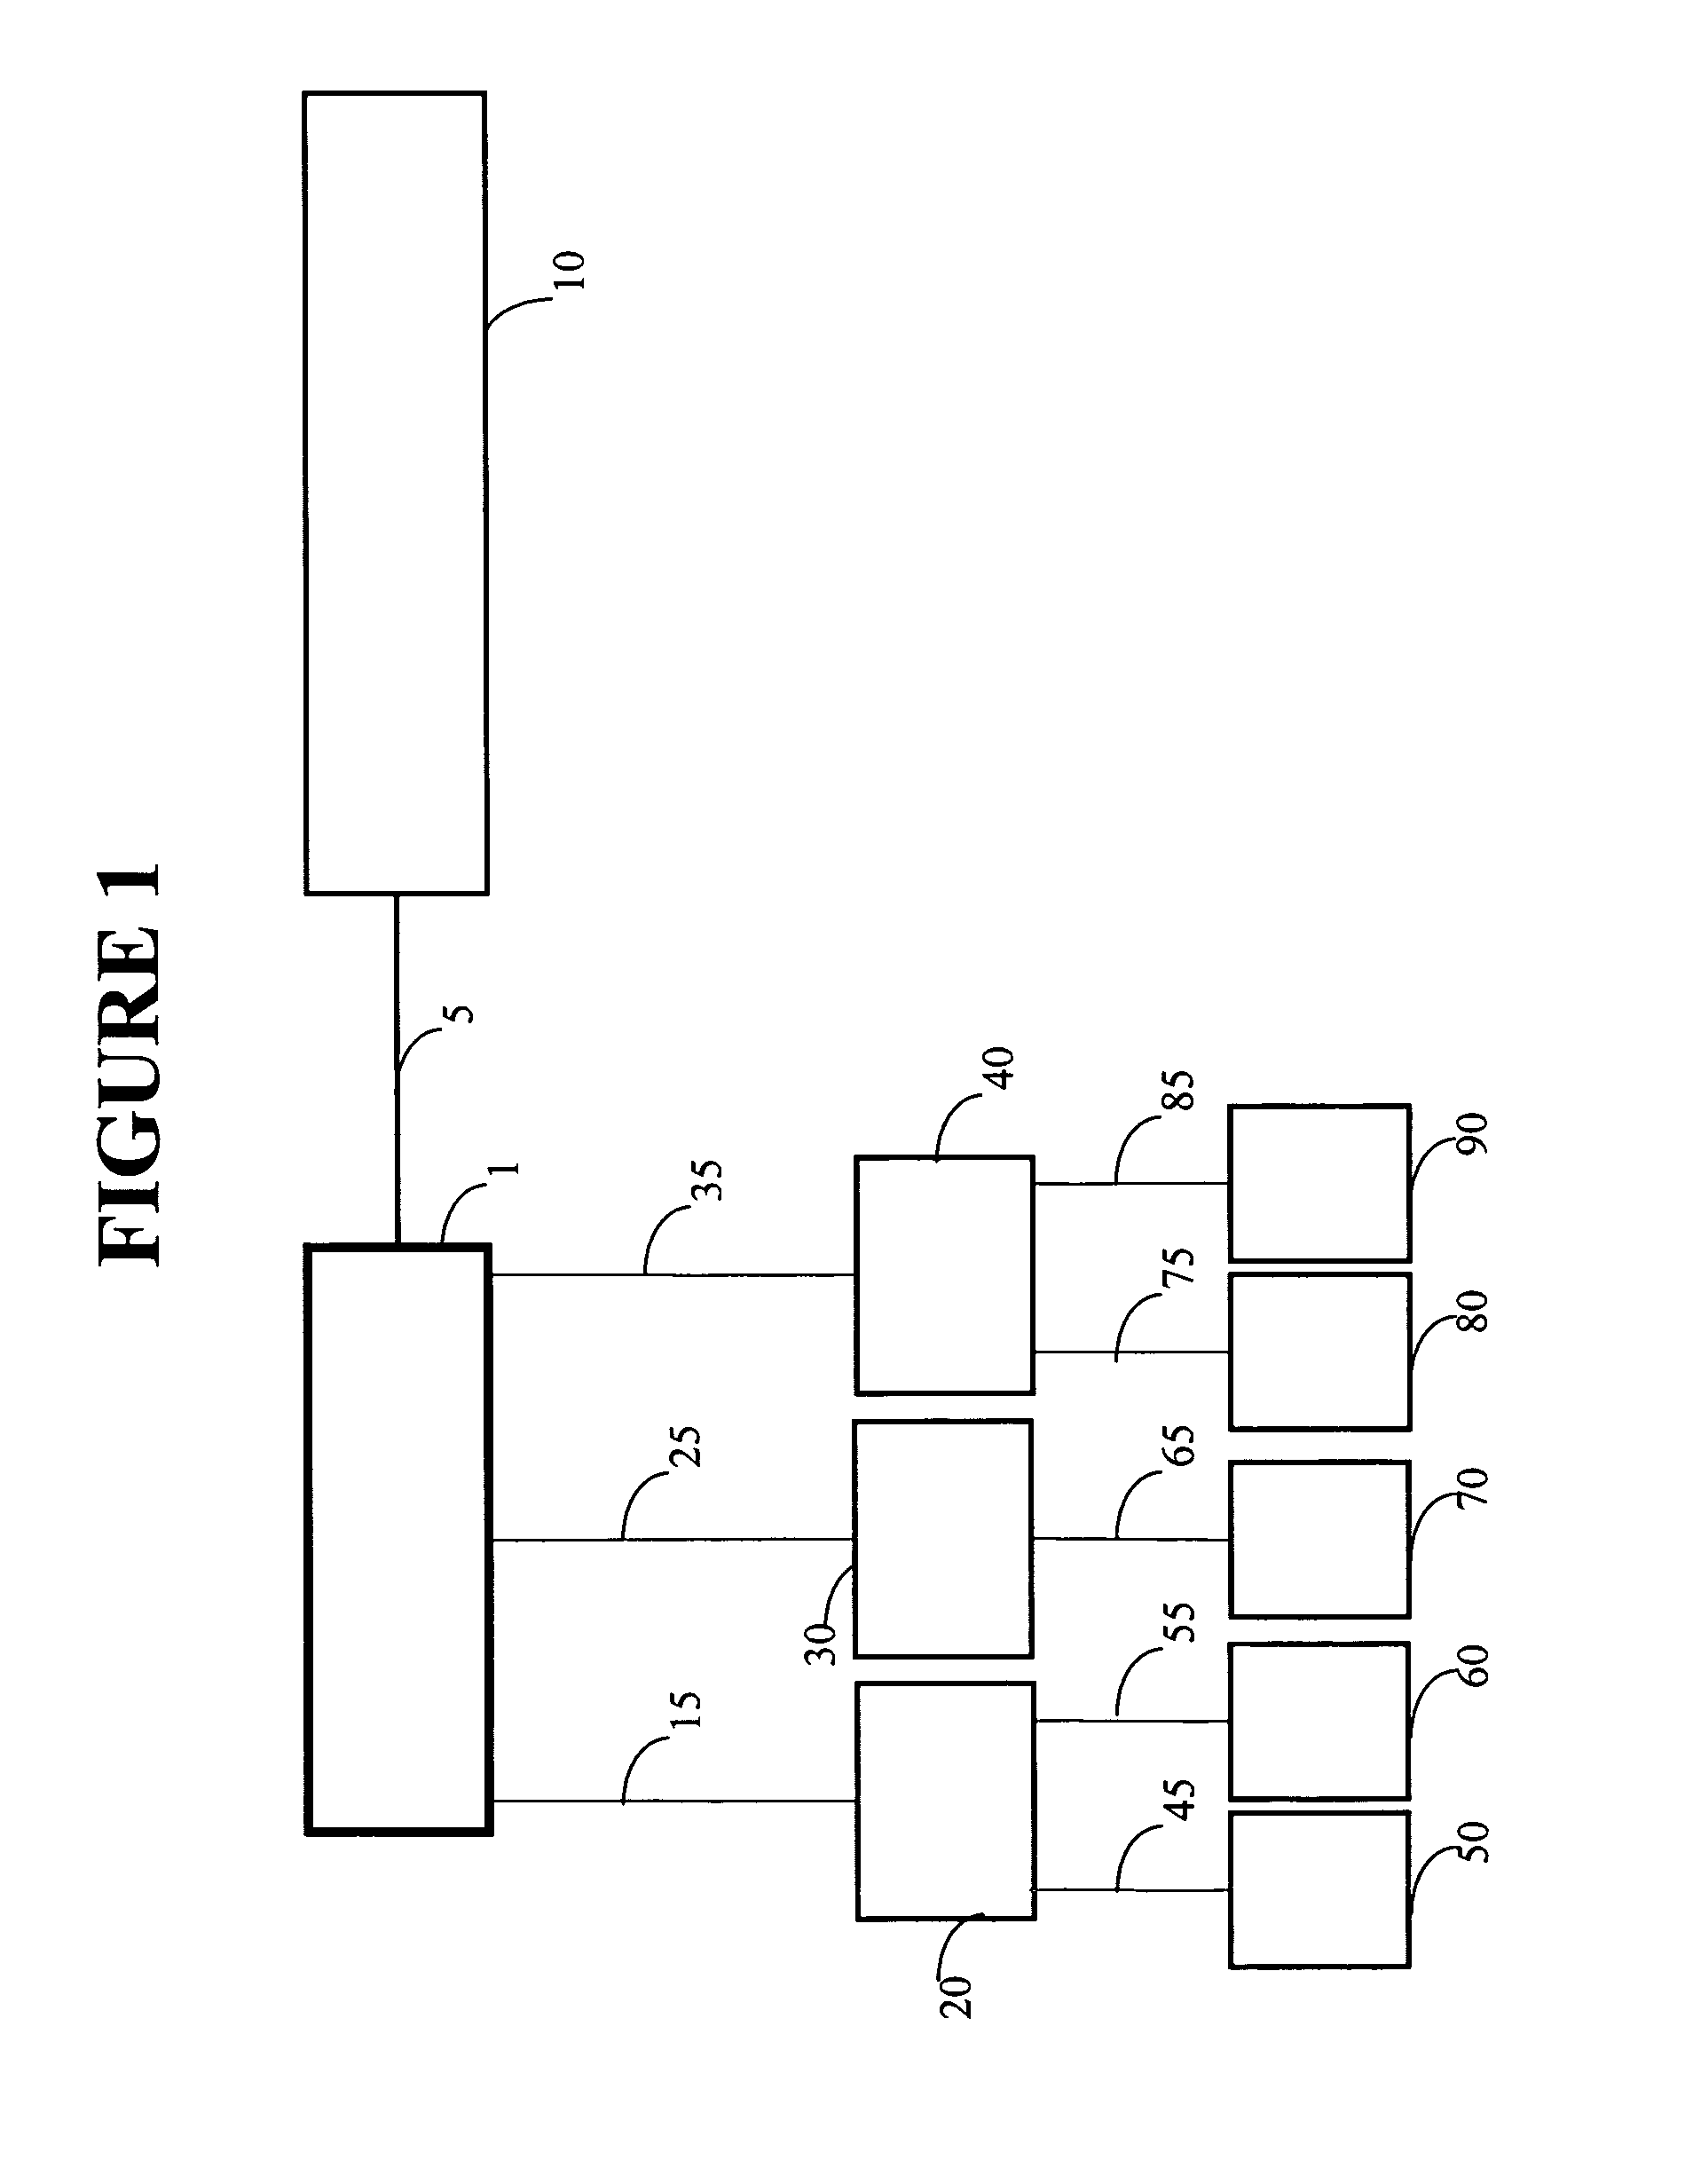 Session bean implementation of a system, method and software for creating or maintaining distributed transparent persistence of complex data objects and their data relationships